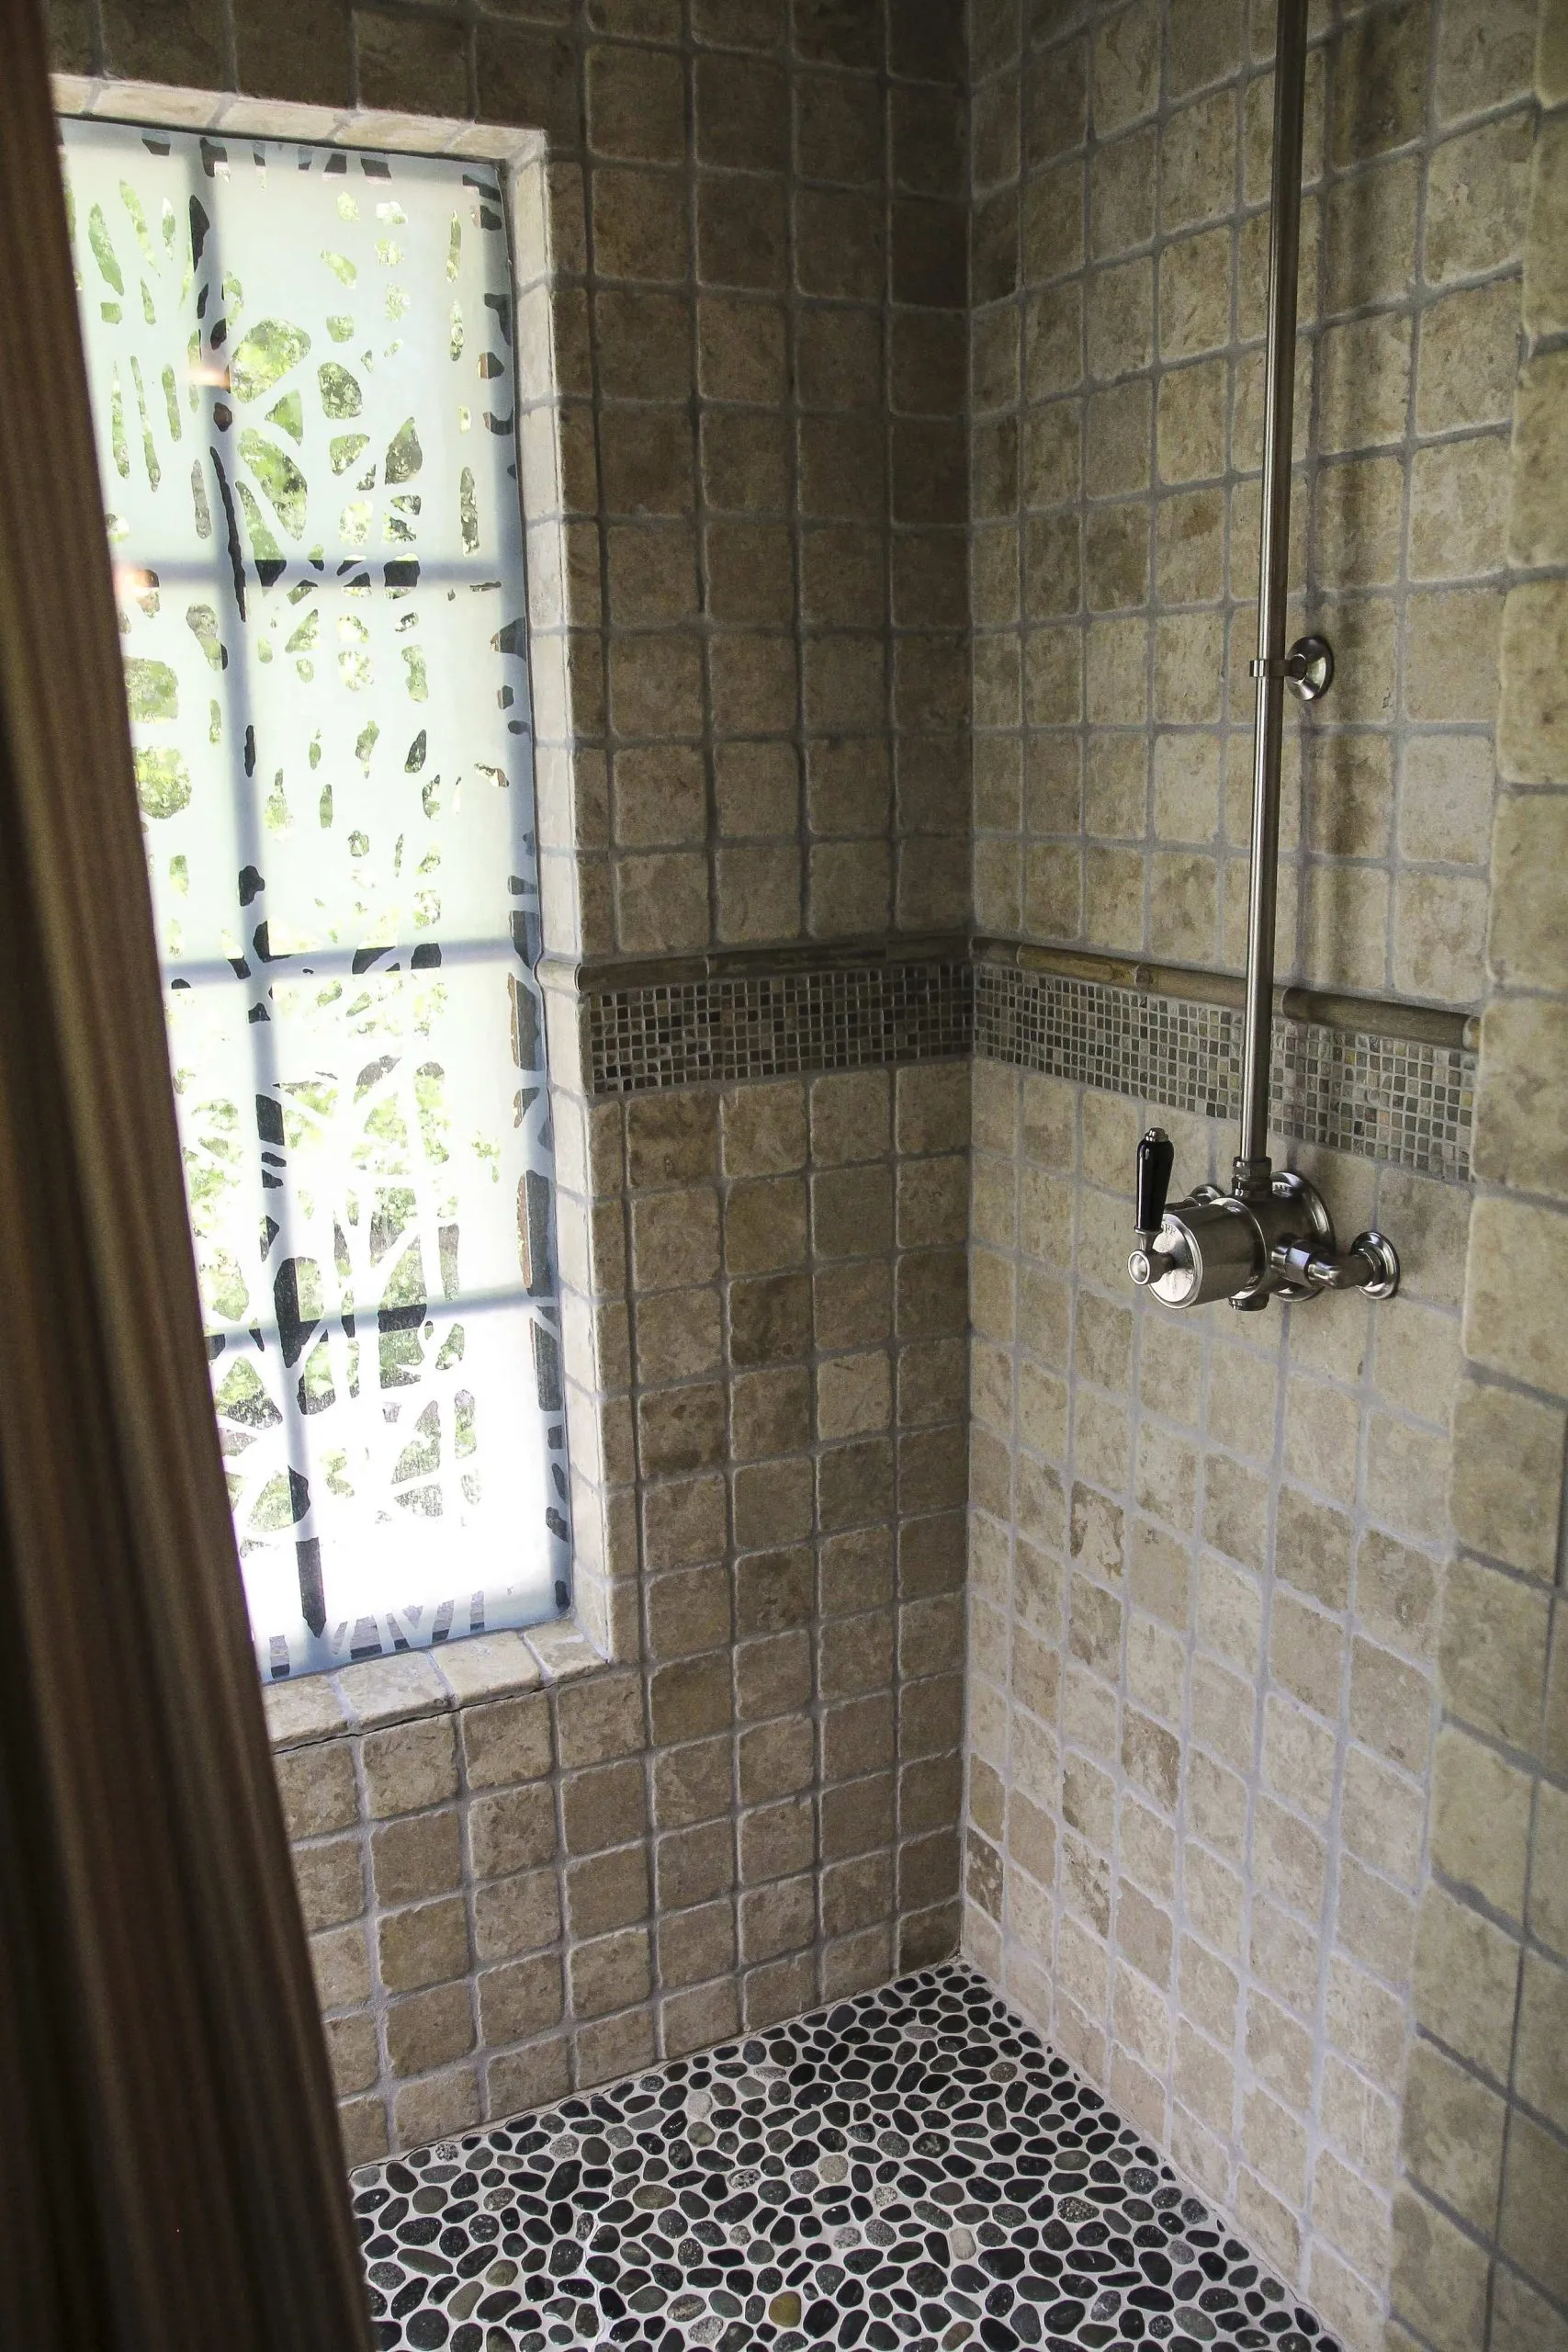 A tiled shower with a frosted window in the side of the wall